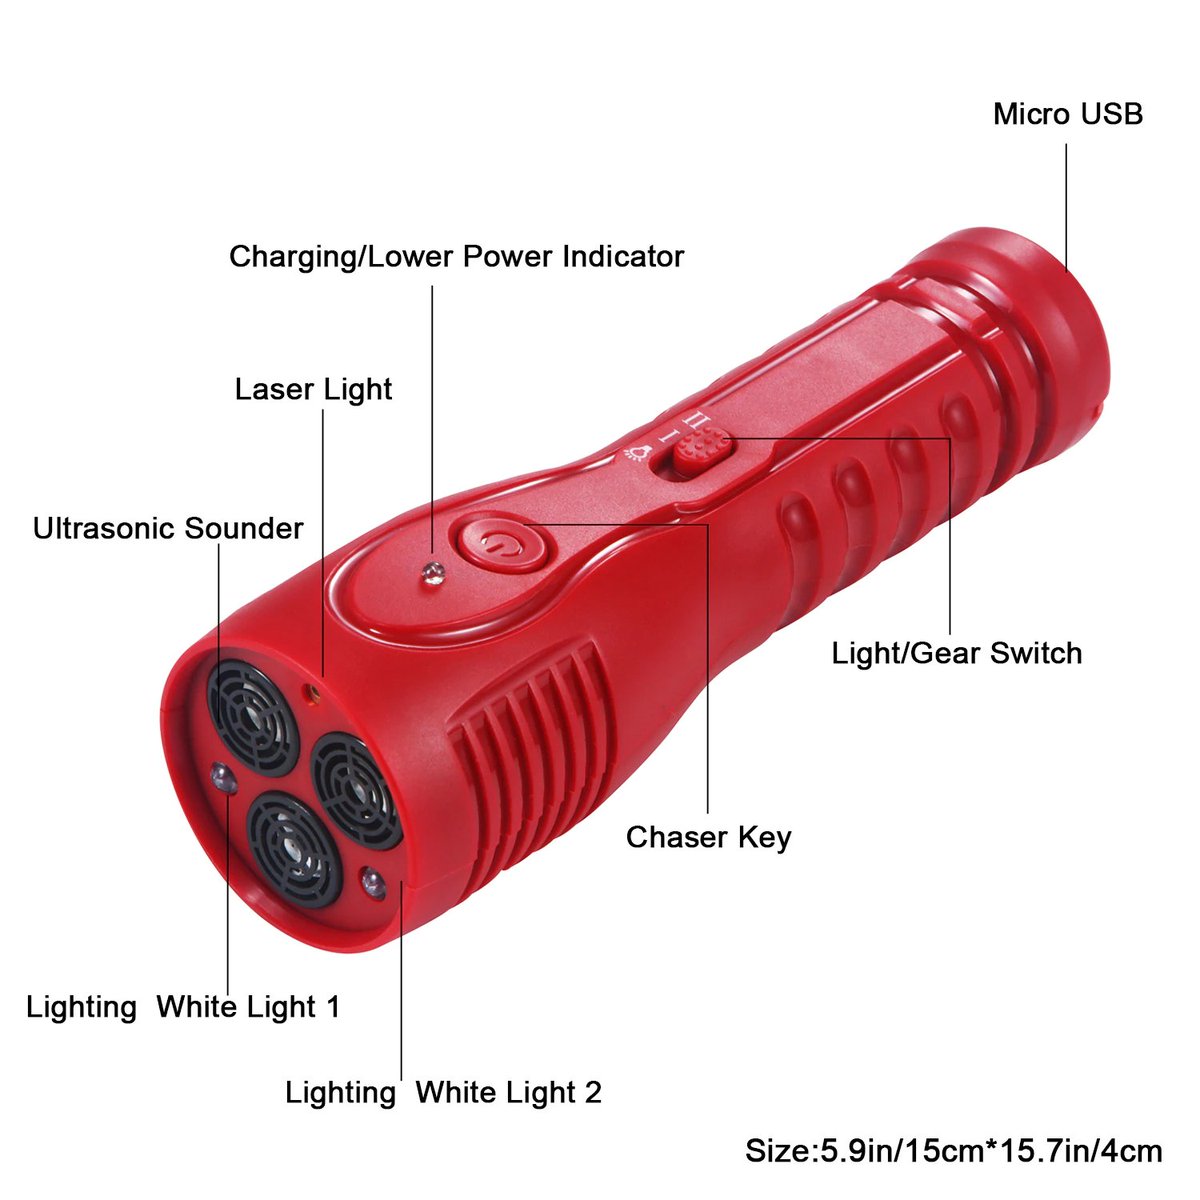 this one is a laser+flashlight+ultrasonic thing but it's also got a "chaser key", which I imagine you activate if you're trans and there's some person fetishing you and you need to get rid of them